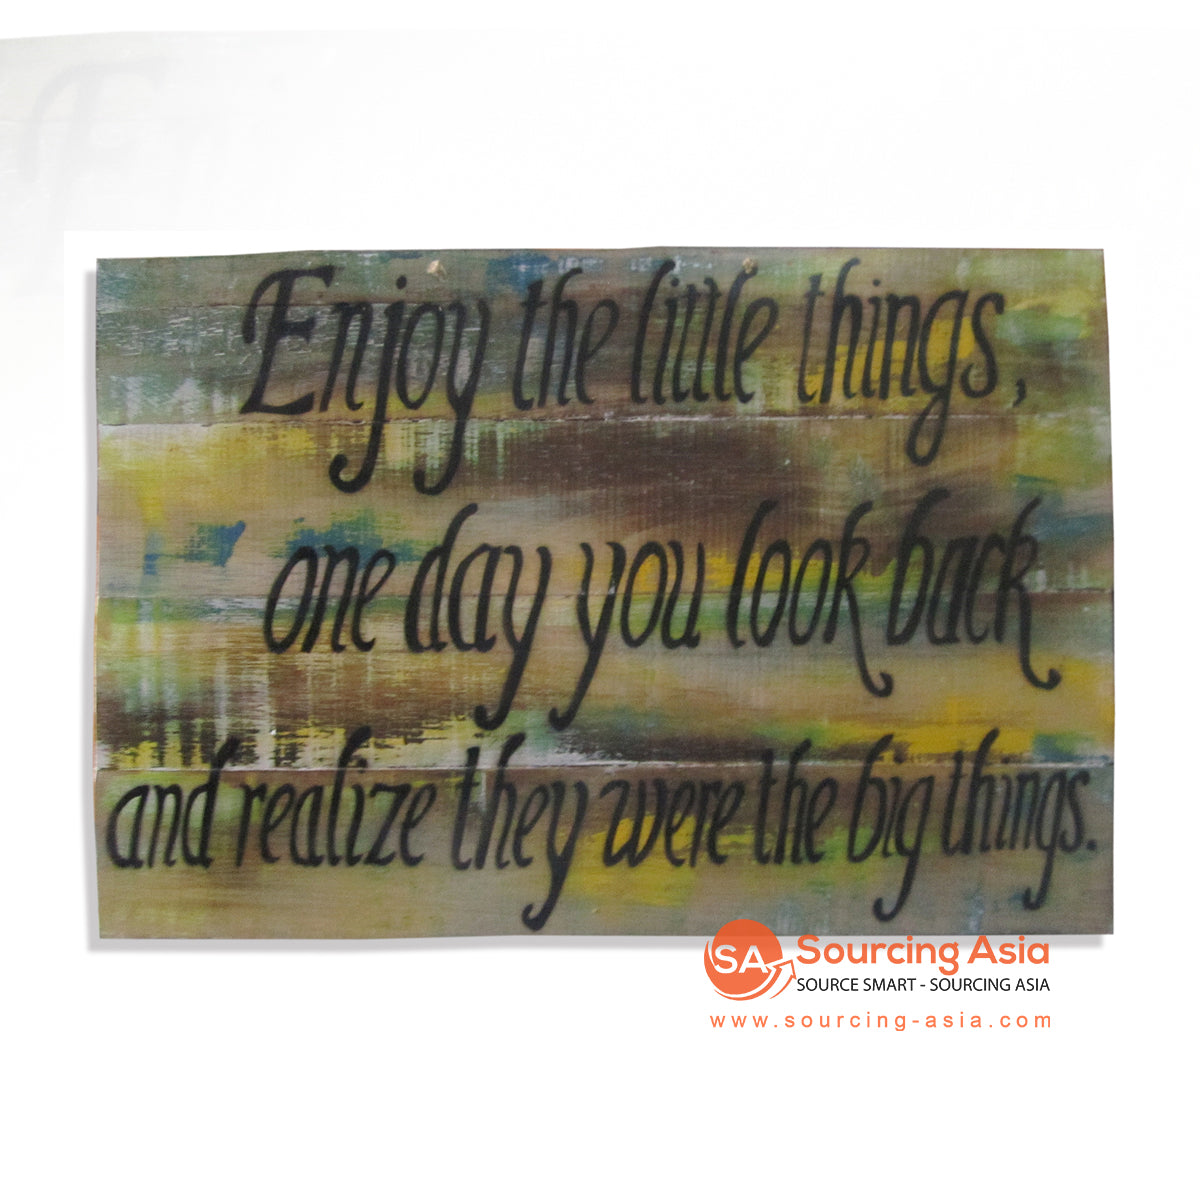 LSA07E WOODEN "ENJOY THE LITTLE THINGS" WALL SIGN BOARD